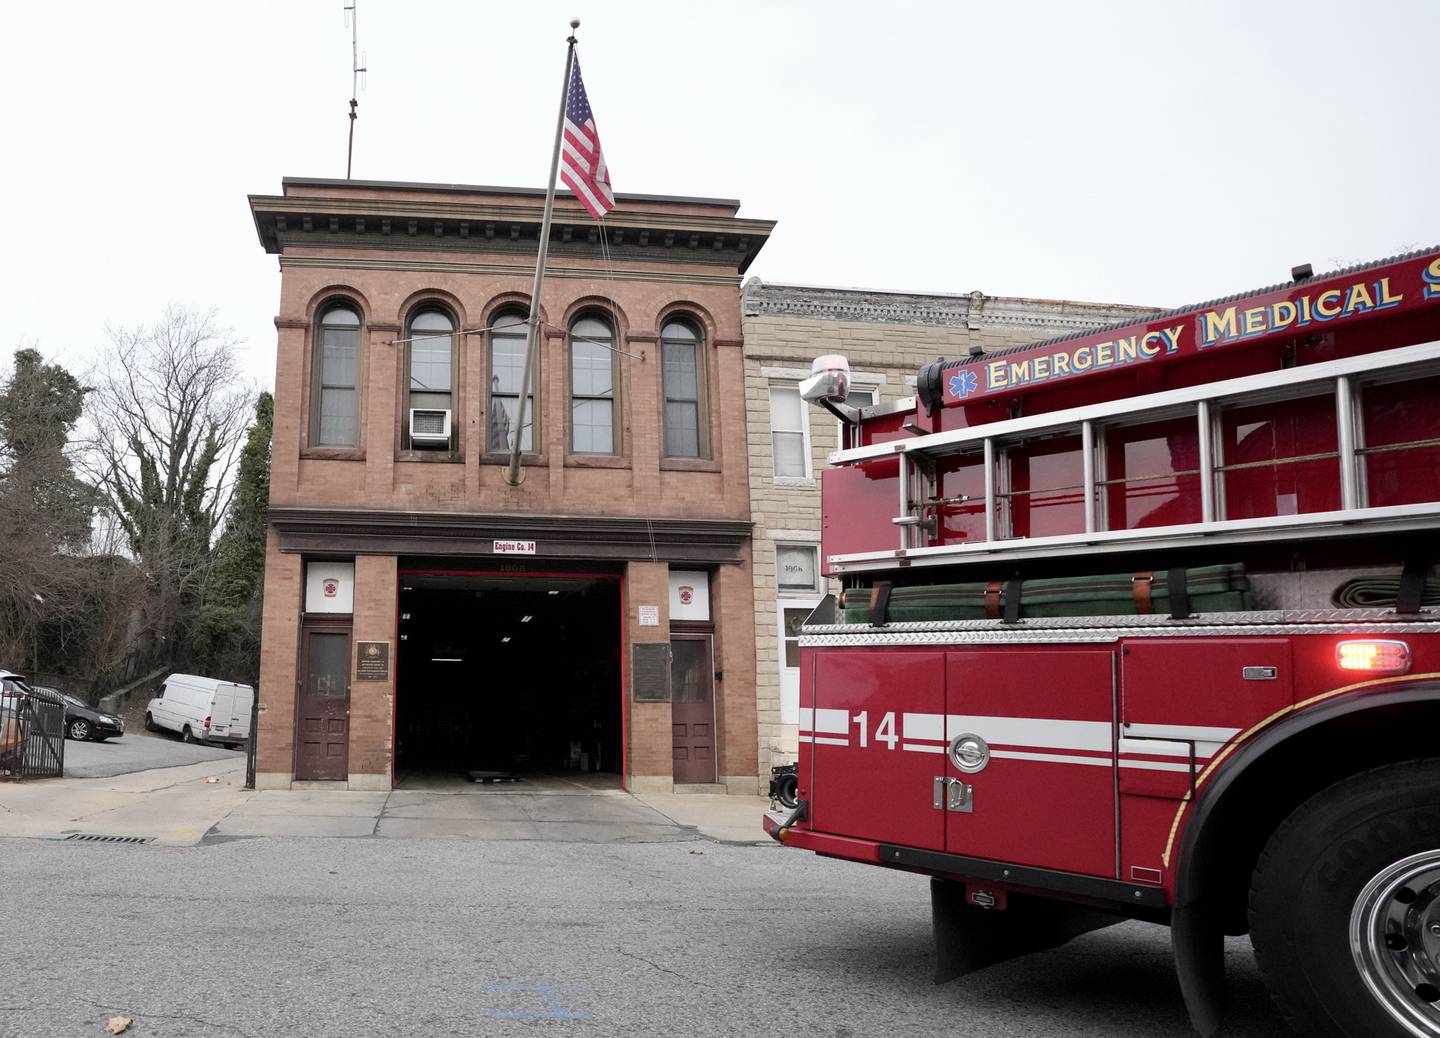 The Economic and Community Development Committee of the City Council held a hearing on legislation designation for two Baltimore City Landmarks. The hearing addressed one of the childhood homes of Cab Calloway, the Reed Calloway House, as well as the Engine 14 firehouse.